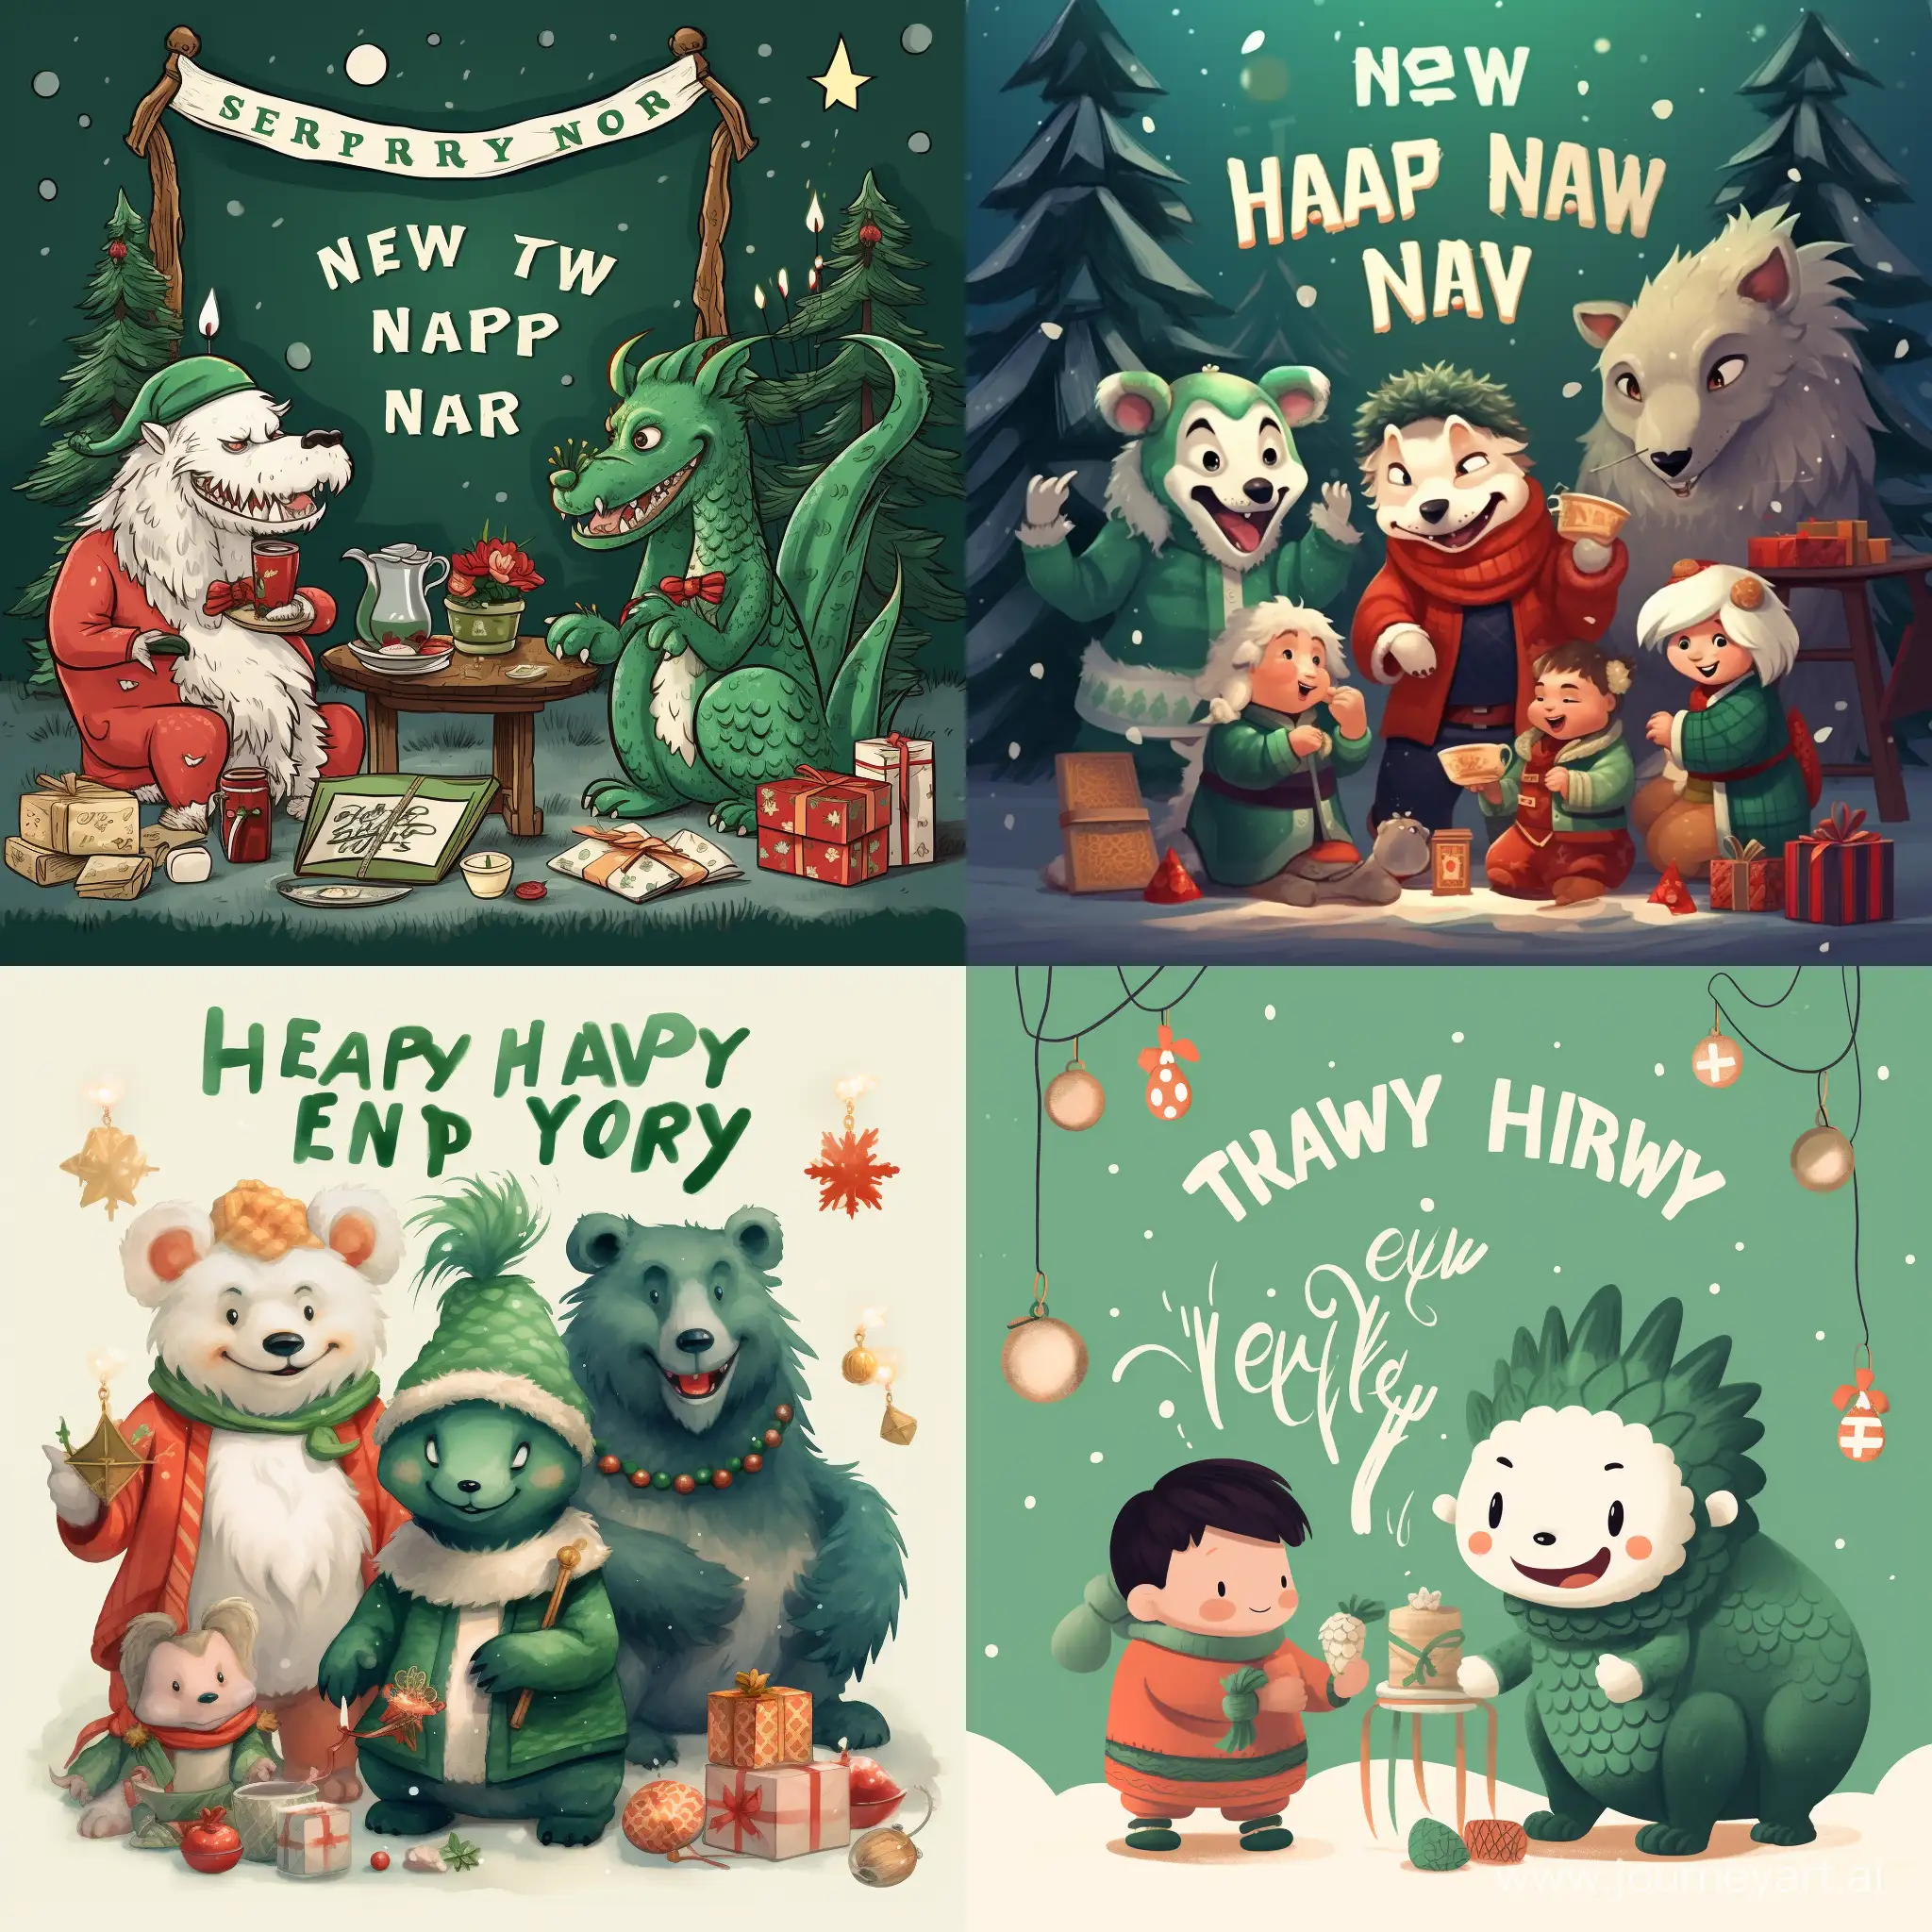 Festive-New-Year-Greetings-Chinese-Green-Dragon-Snow-and-Joyful-Creatures